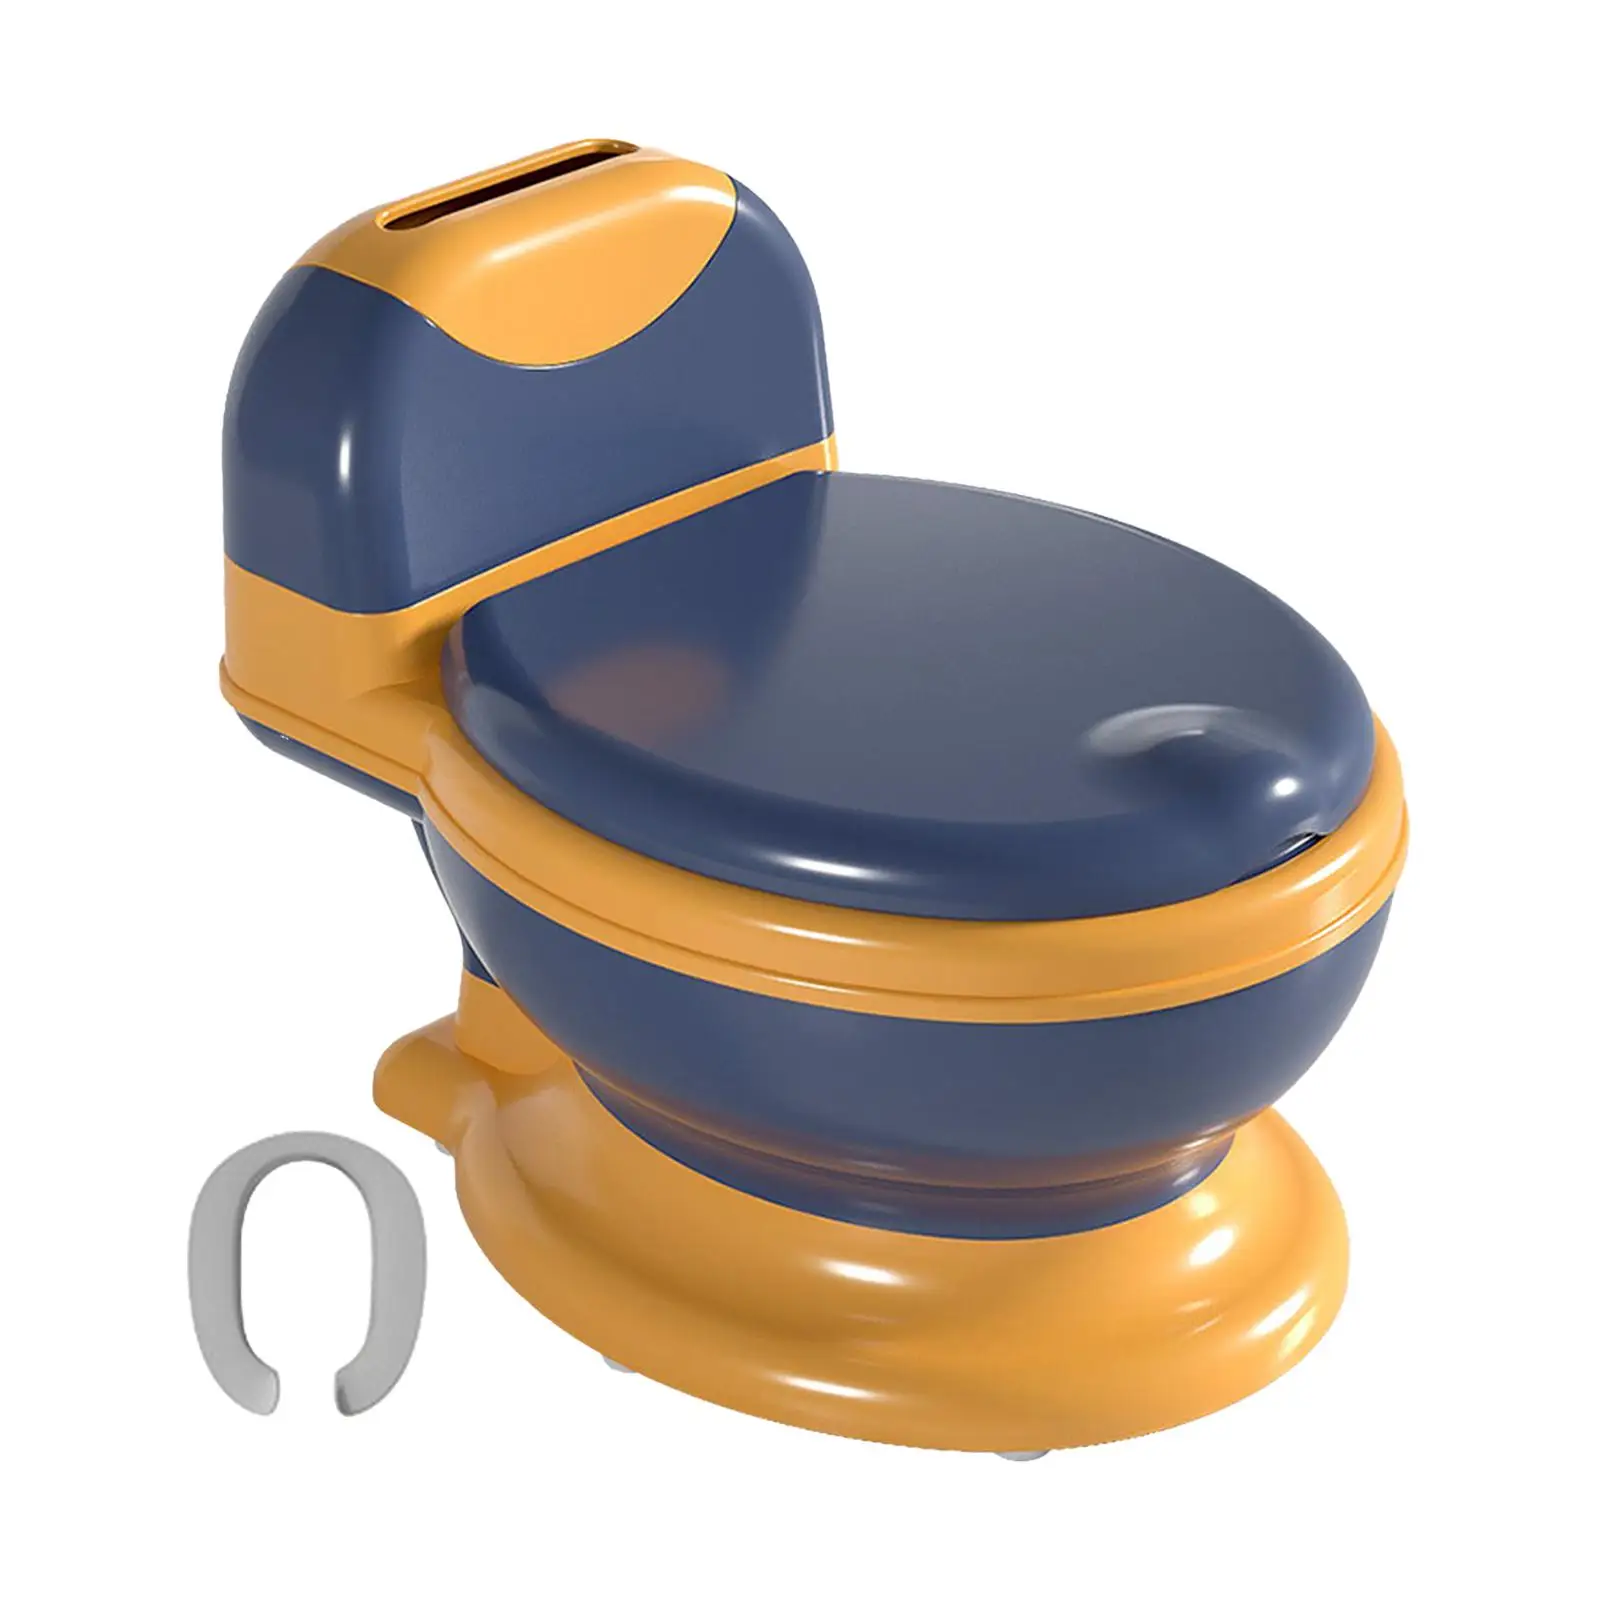 Potty Train Toilet Toilet Training Seat Potty Seat Toddlers Potty Chair Realistic Toilet for Boys Baby Kids Toddlers Children